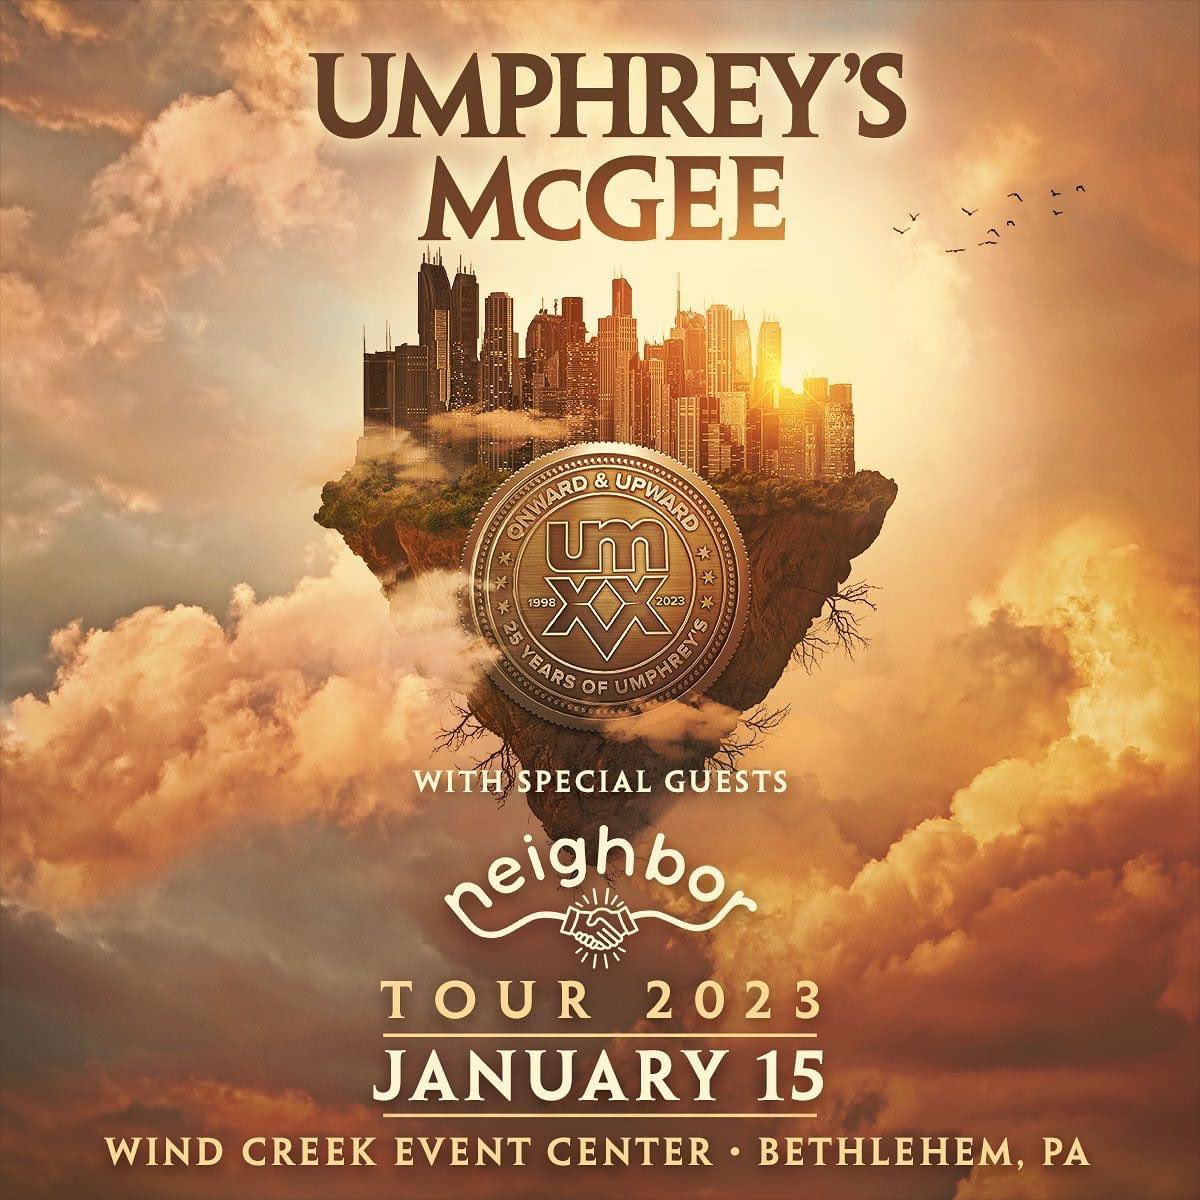 Umphrey's McGee Tour 2022 2023 Tickets and Details